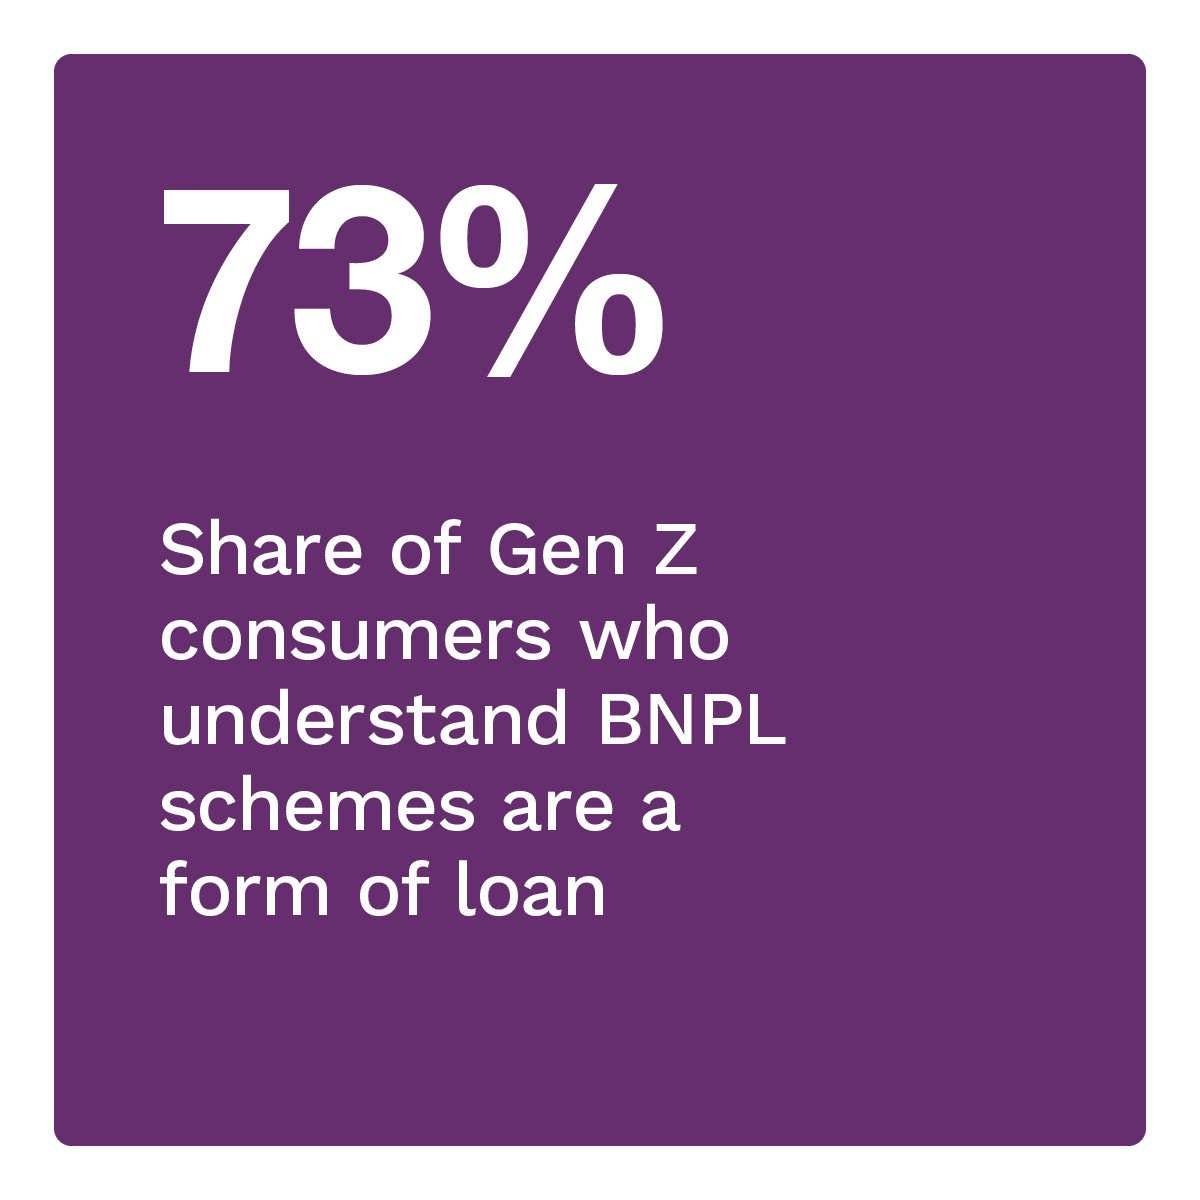 73%: Share of Gen Z consumers who understand BNPL schemes are a form of loan